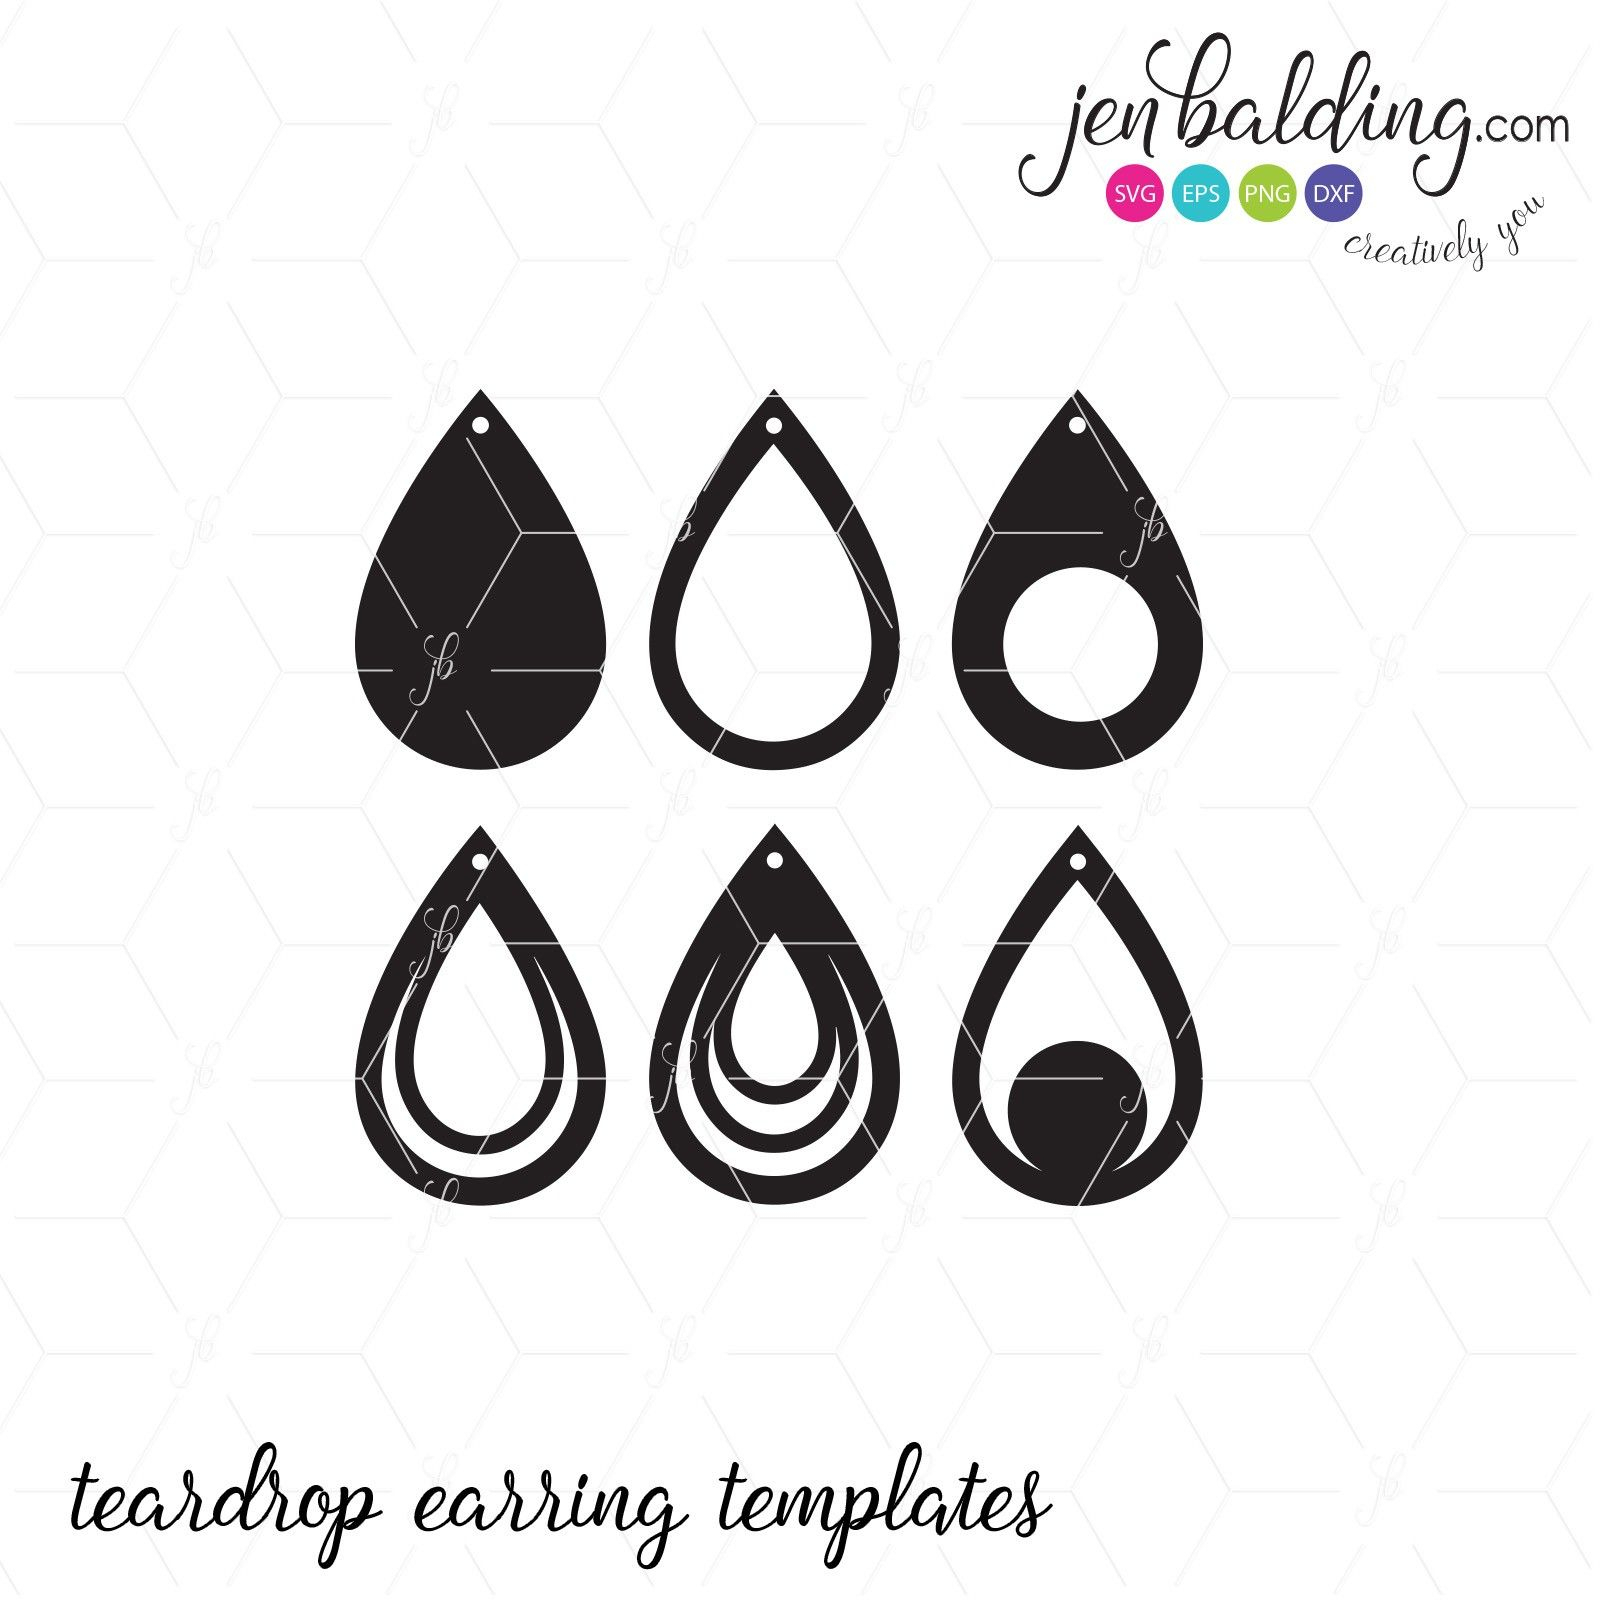 Free Svg Card Templates | Best  | Leather Earrings Inside Free Svg Card Templates